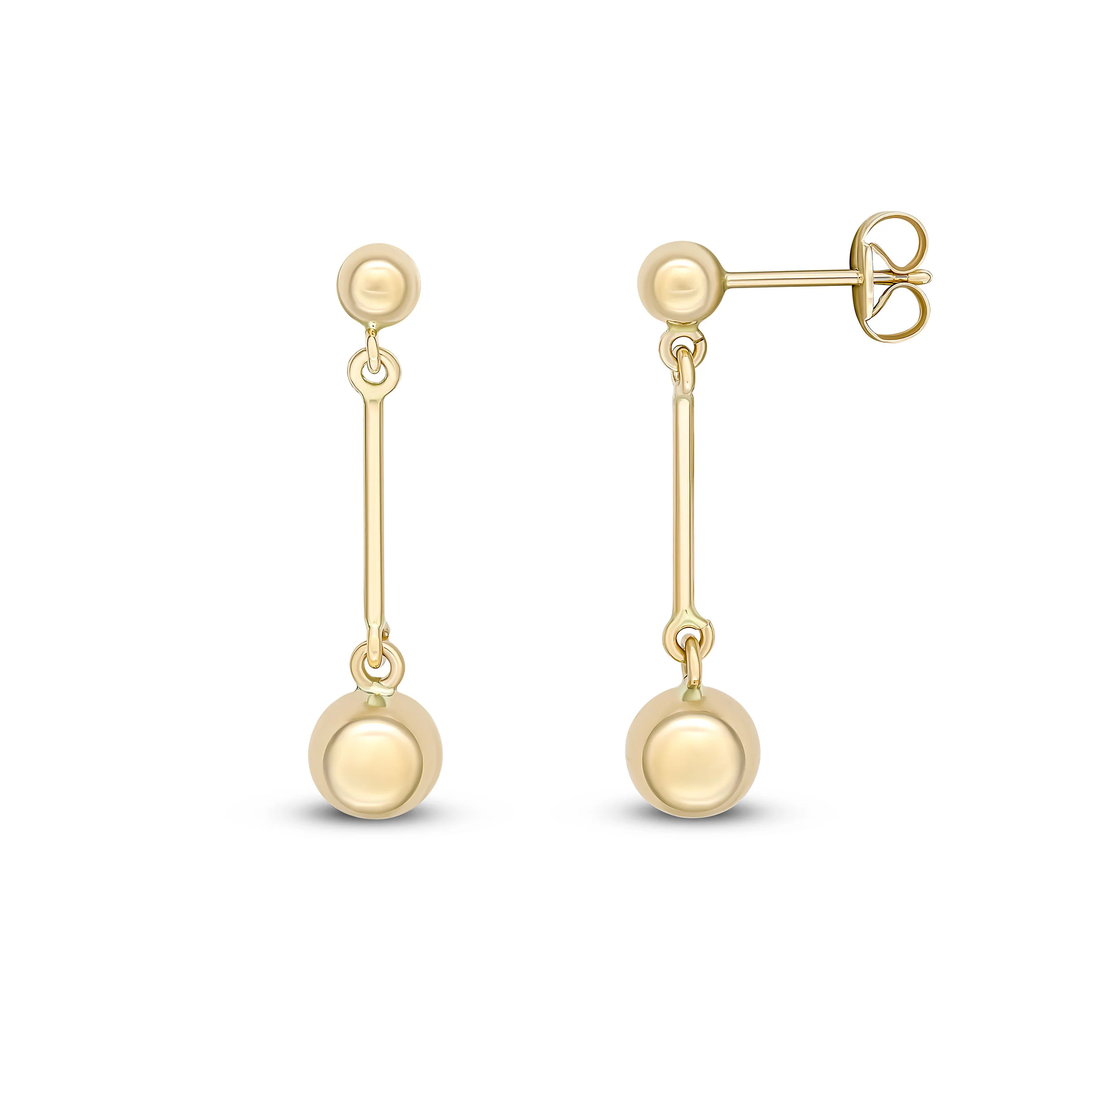 9CT Yellow Gold 4mm and 6mm Polished Ball &amp; Bar Drop Earrings - Robert Anthony Jewellers, Edinburgh